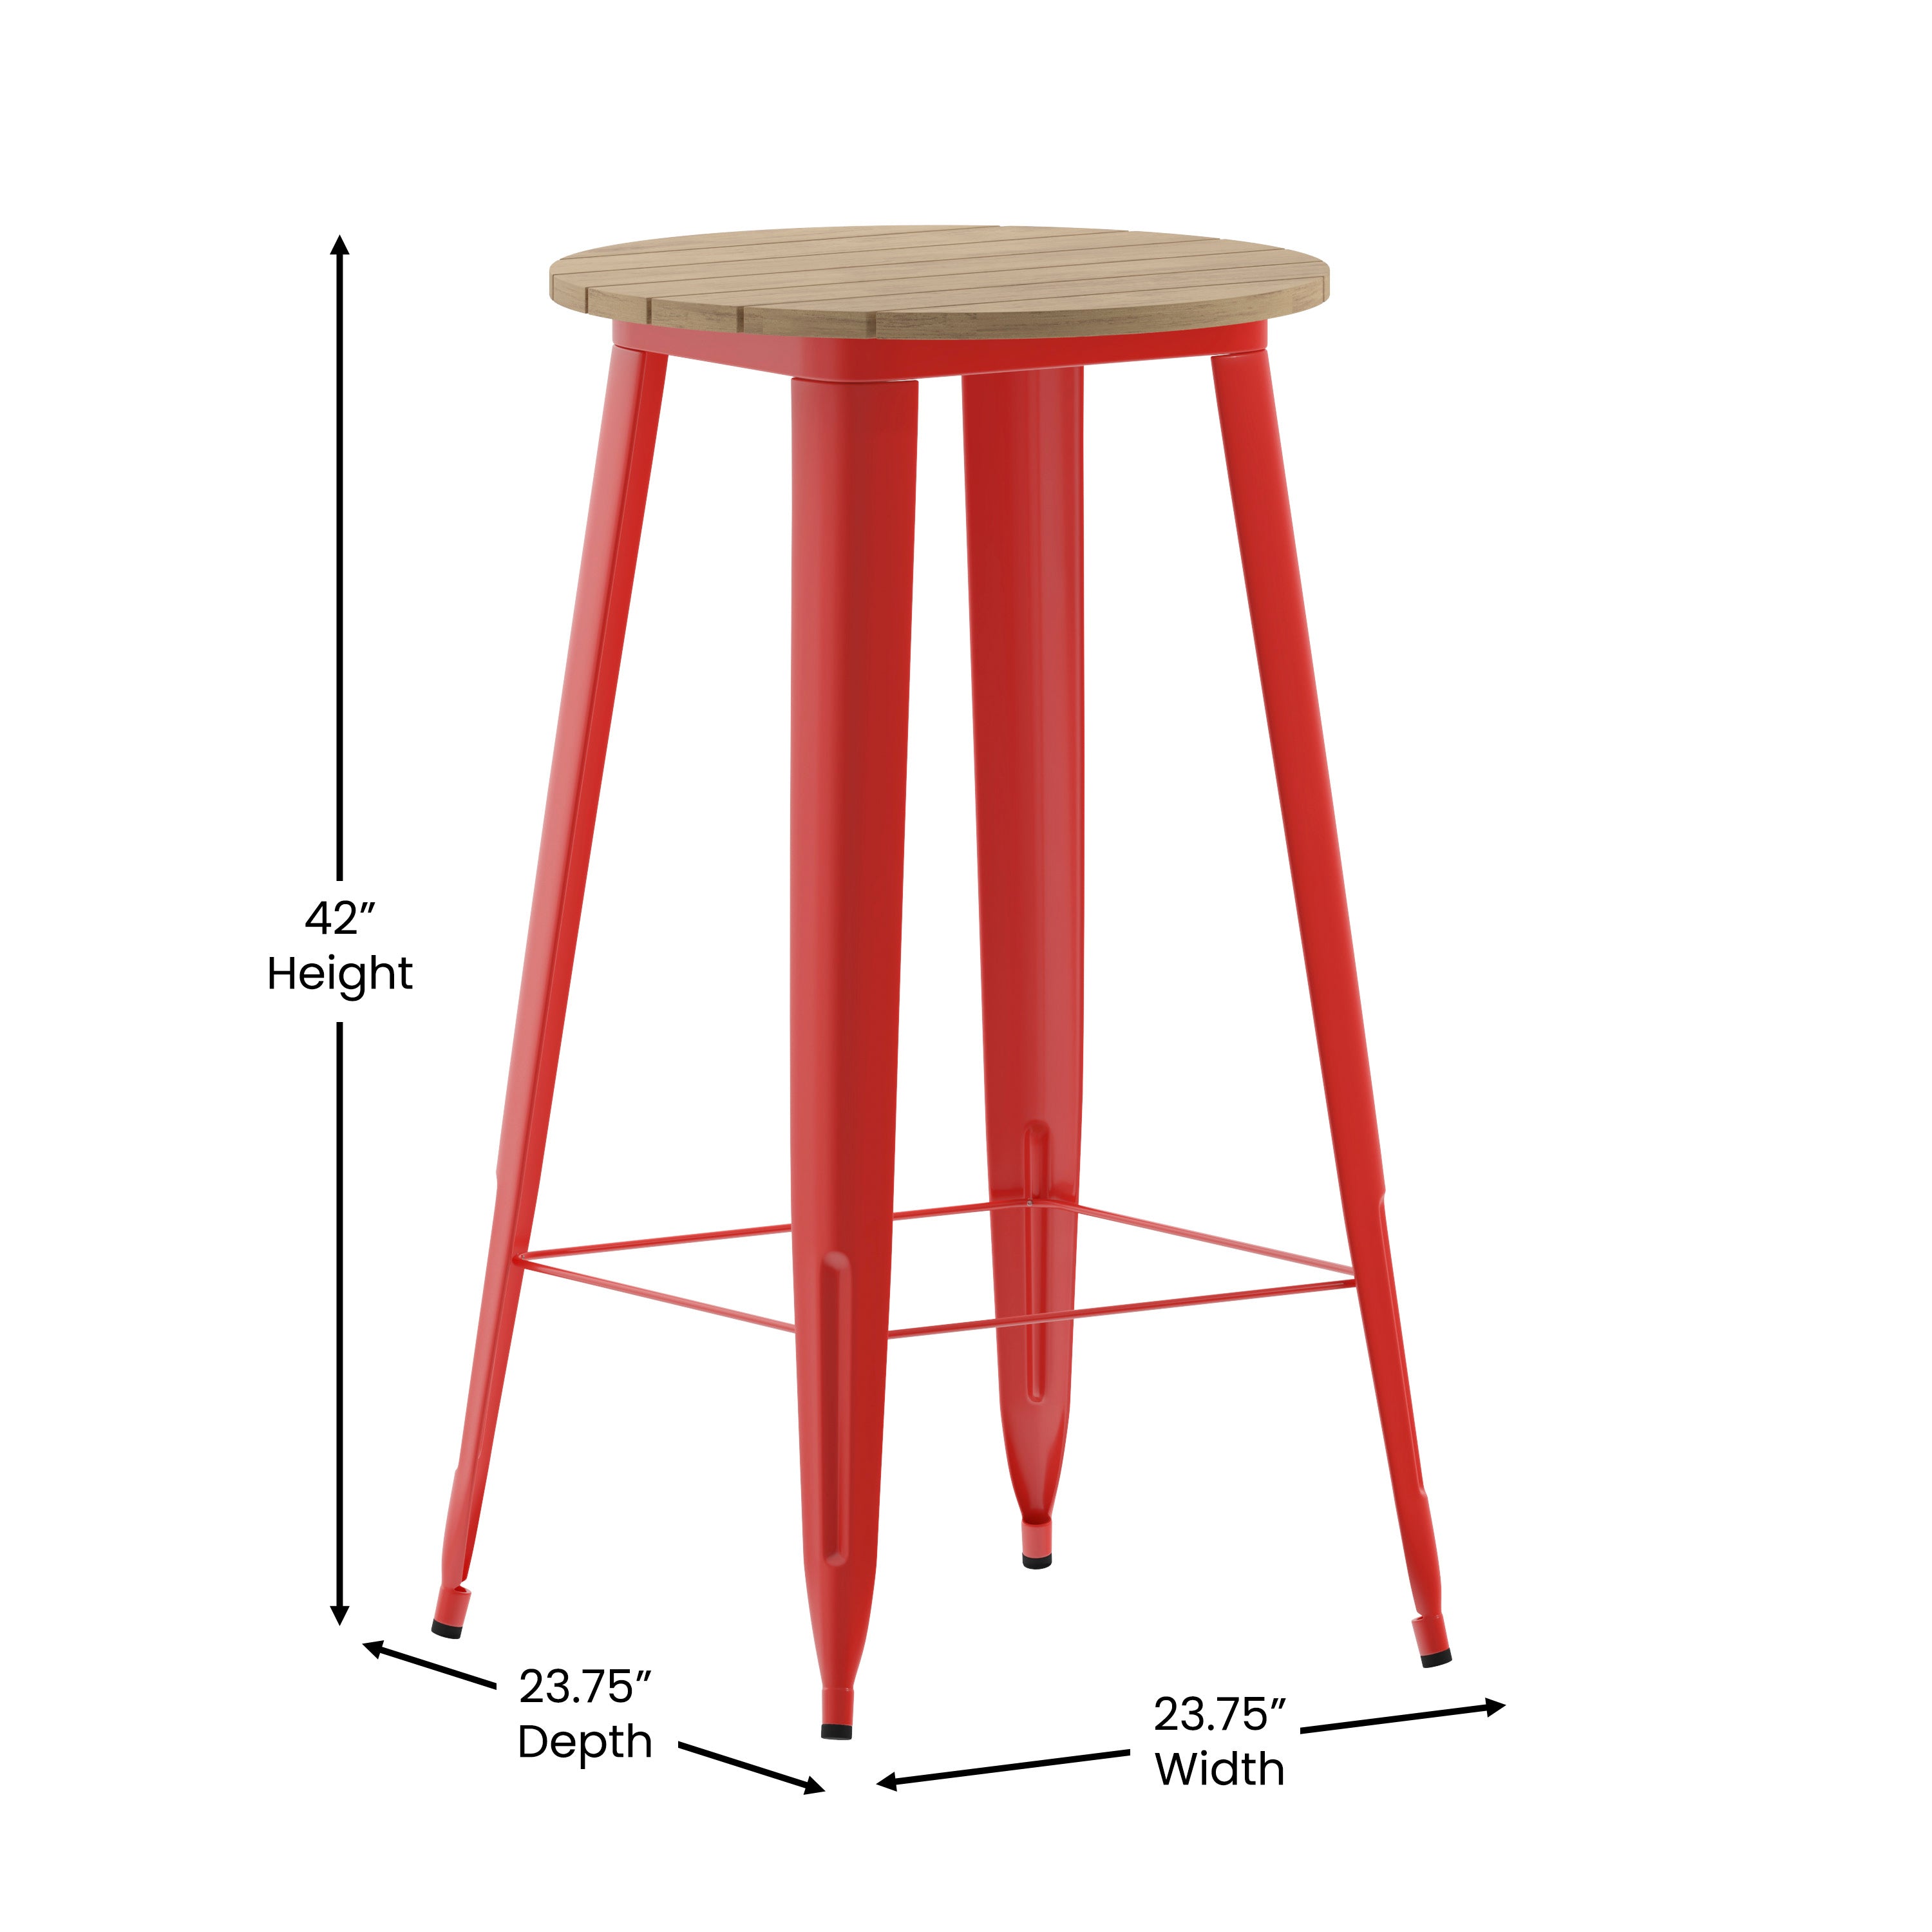 Declan Commercial Indoor/Outdoor Bar Top Table, 23.75" Round All Weather Poly Resin Top with Steel base-Metal Colorful Restaurant Bar Table-Flash Furniture-Wall2Wall Furnishings